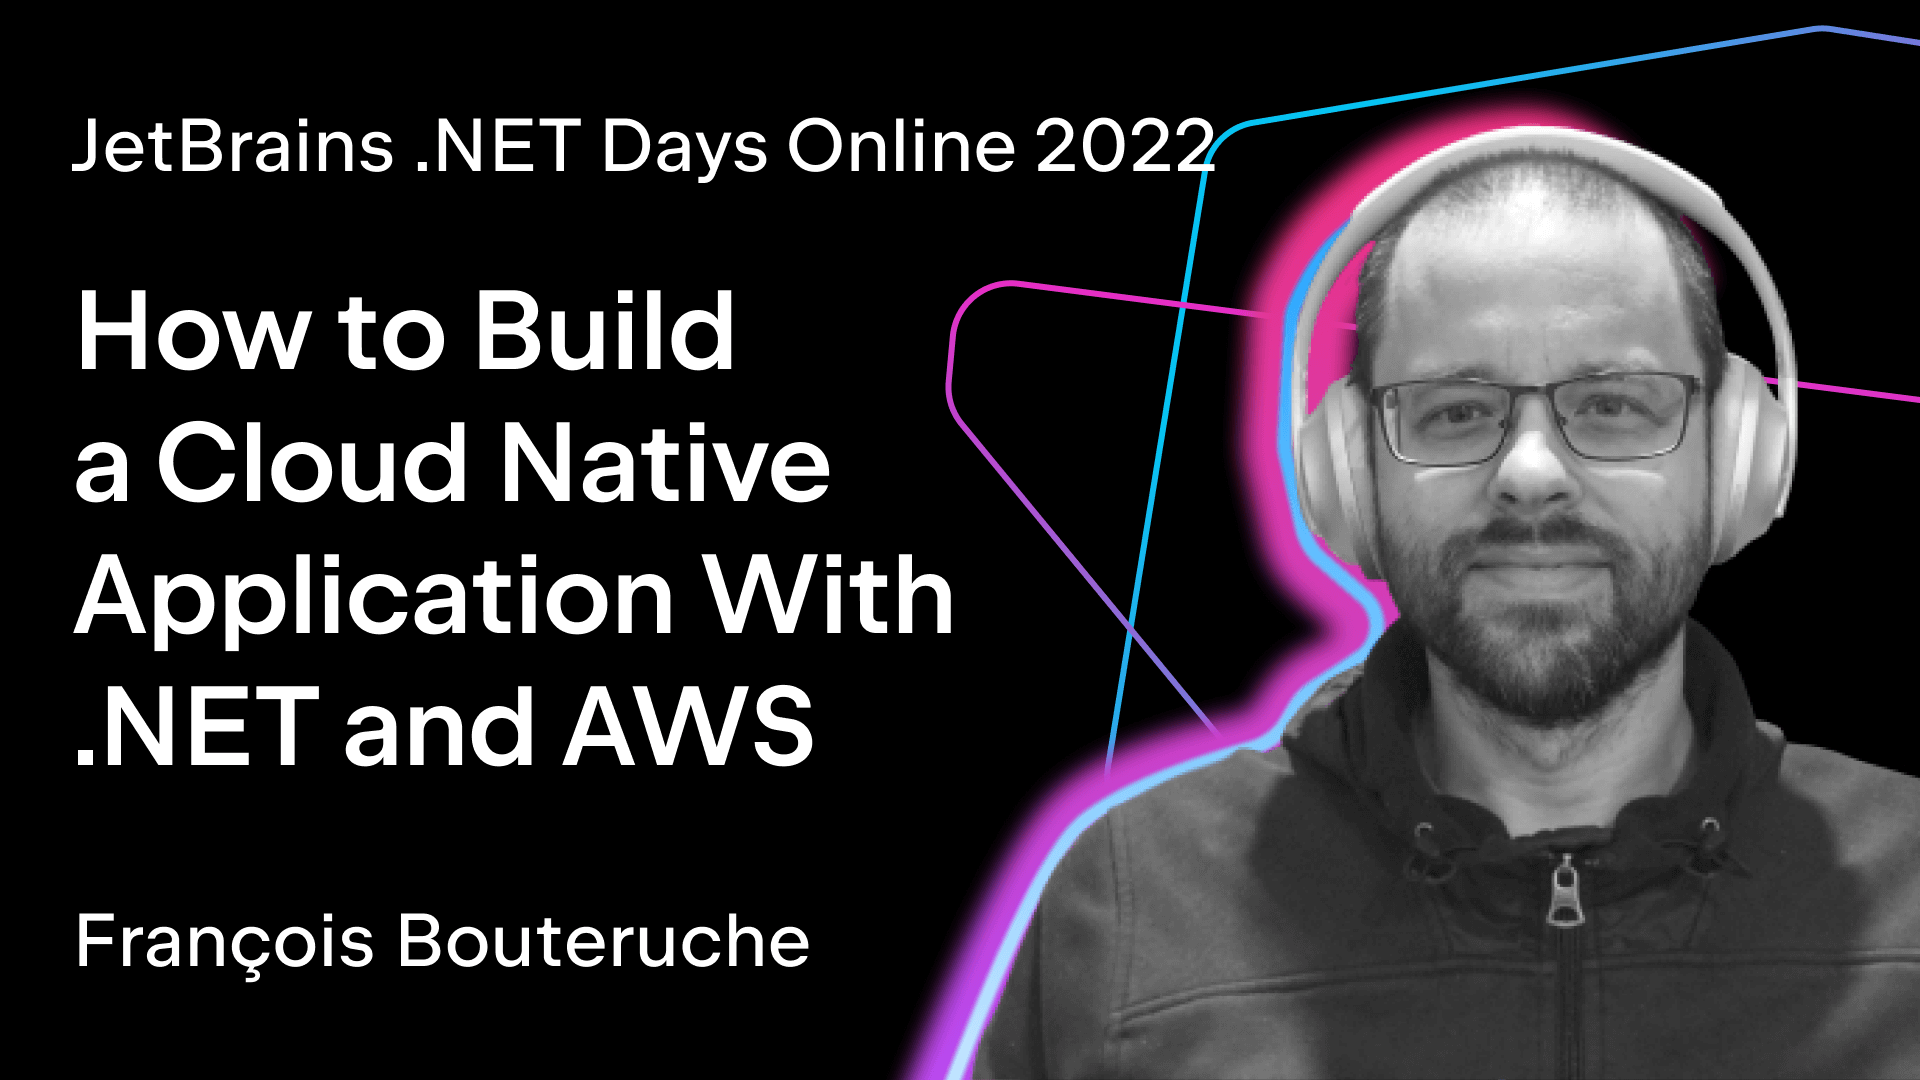 How to build a cloud native application with .NET and AWS